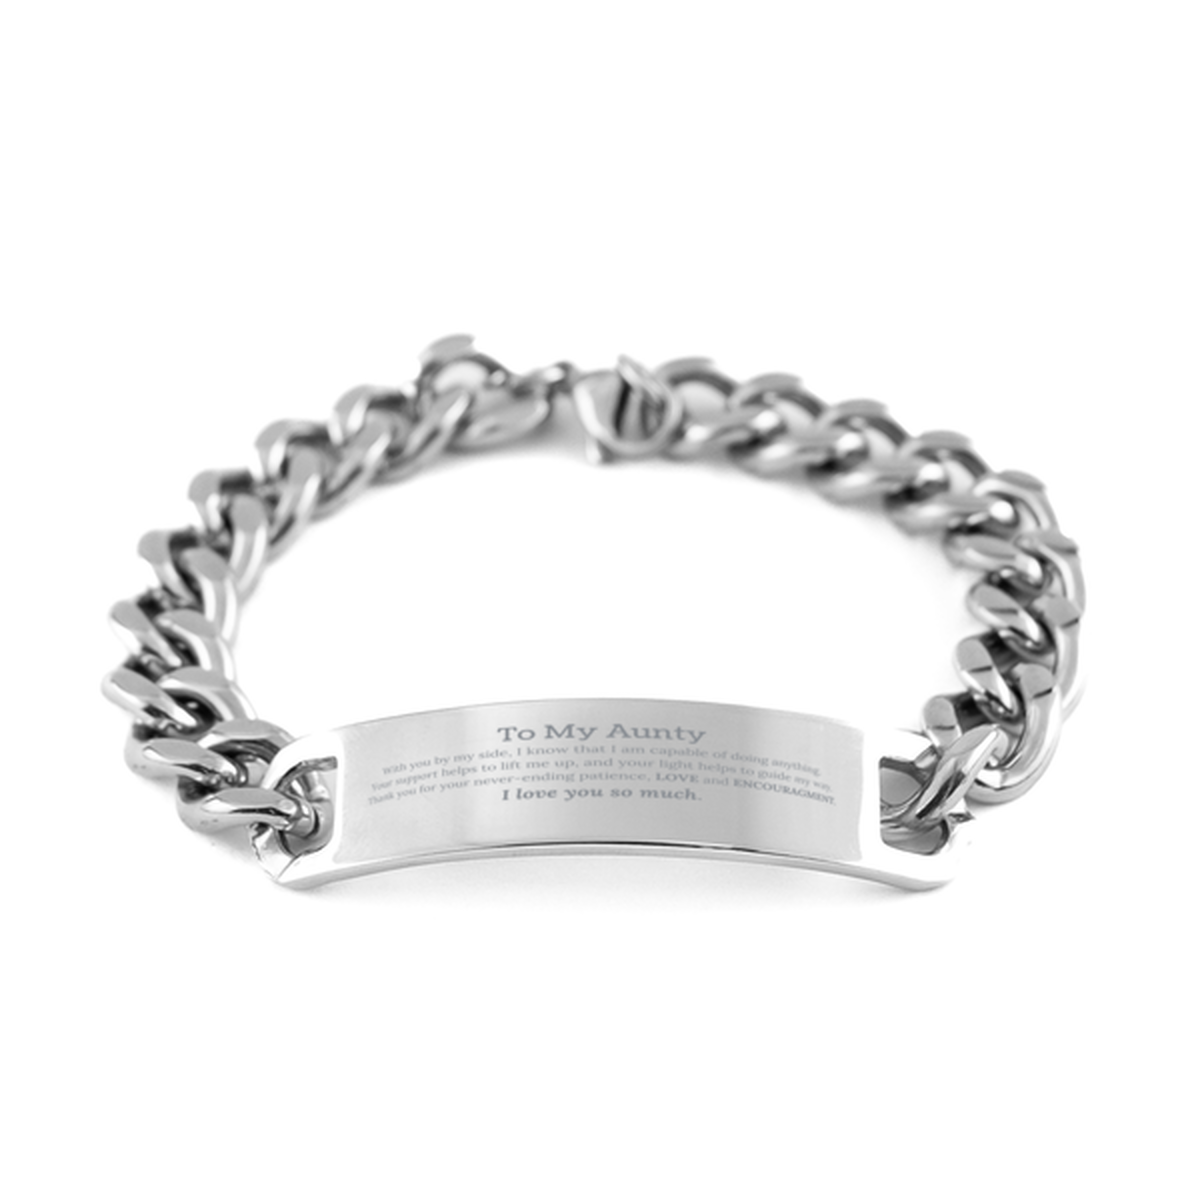 Appreciation Aunty Cuban Chain Stainless Steel Bracelet Gifts, To My Aunty Birthday Christmas Wedding Keepsake Gifts for Aunty With you by my side, I know that I am capable of doing anything. I love you so much